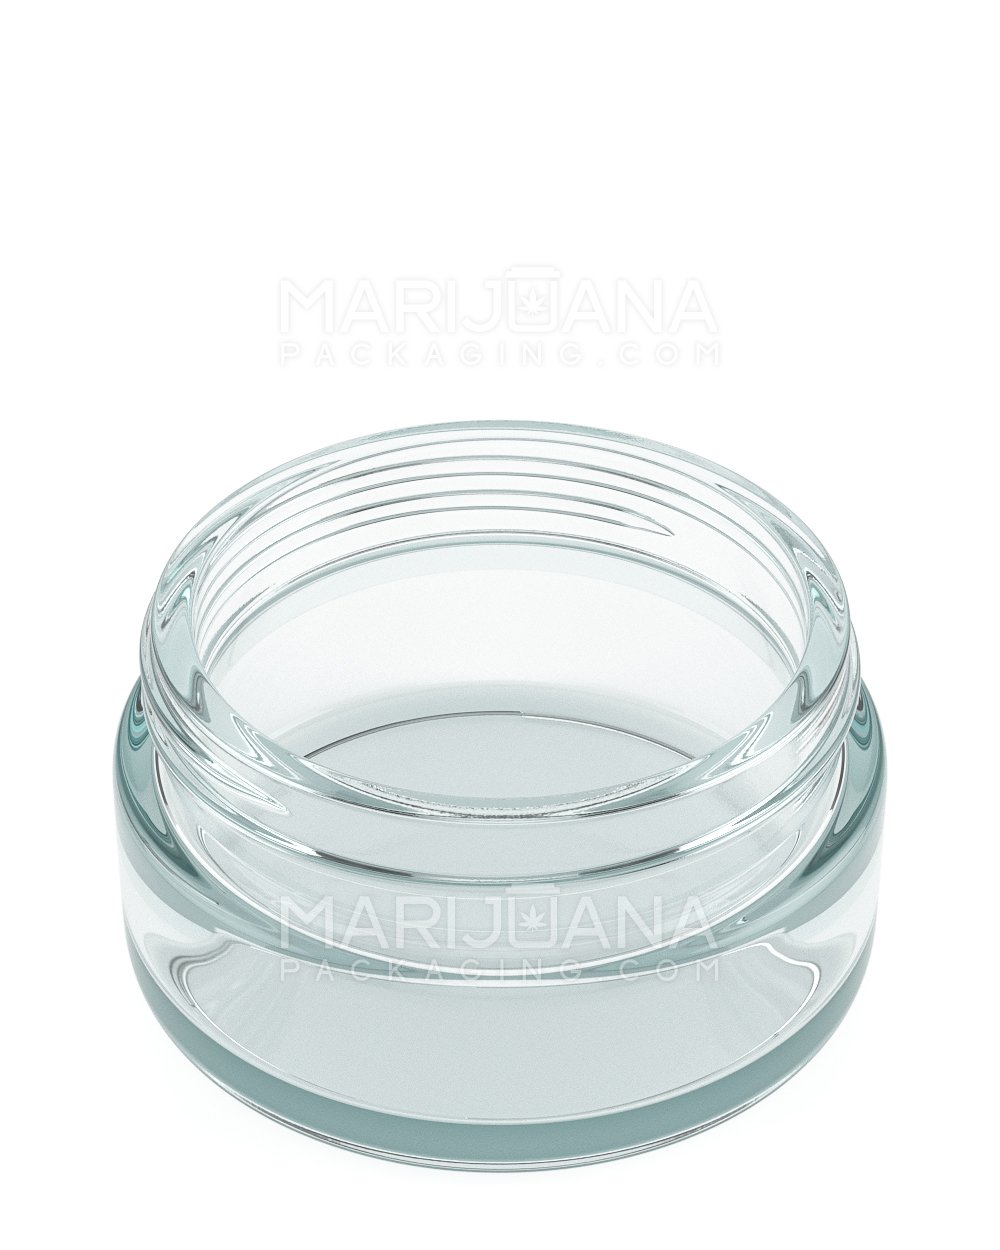 Straight Sided Clear Glass Jars | 63mm - 1.7oz - 96 Count - 2